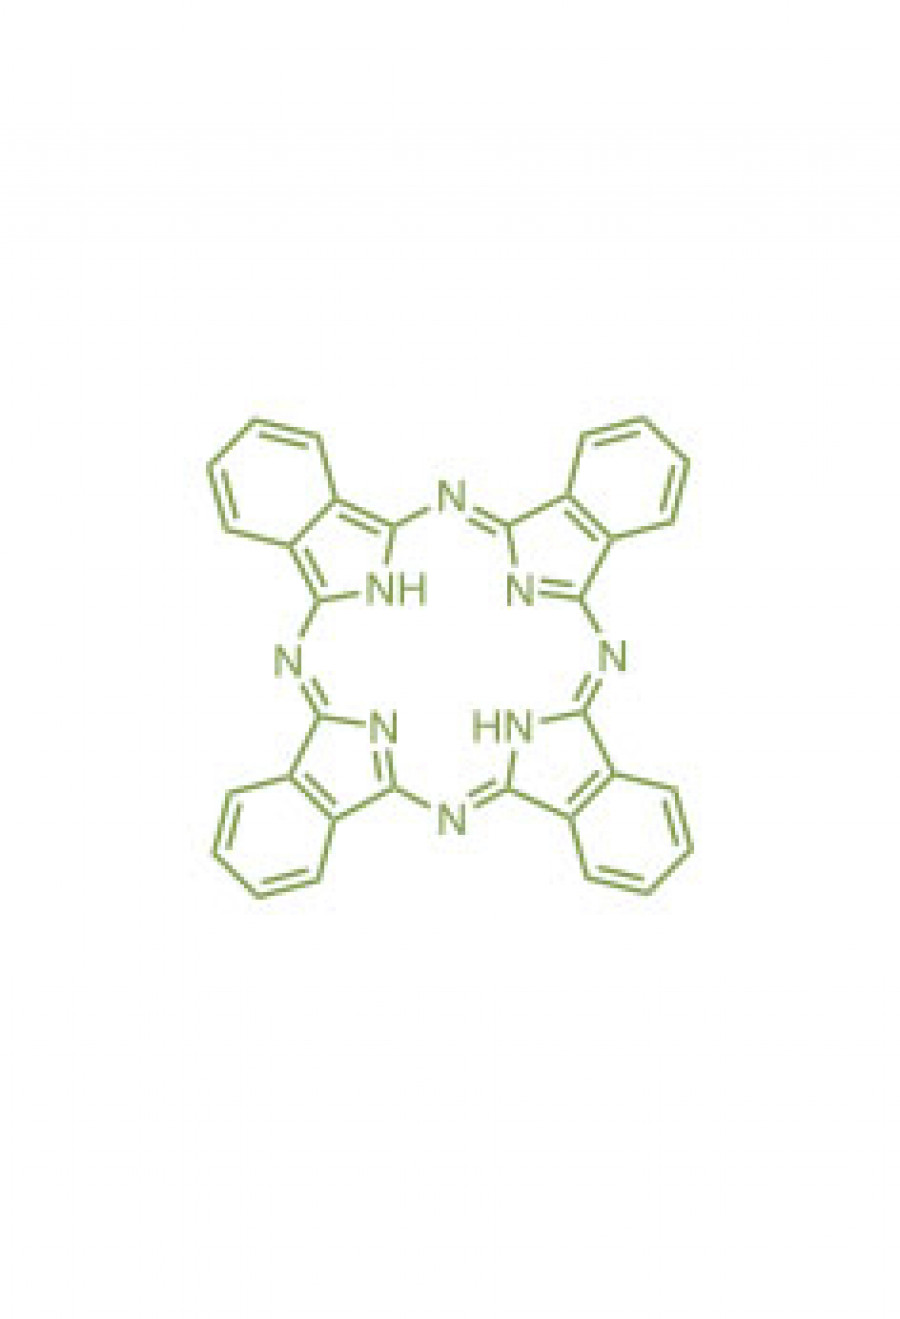 phthalocyanine  | Porphychem Expert porphyrin synthesis for research & industry